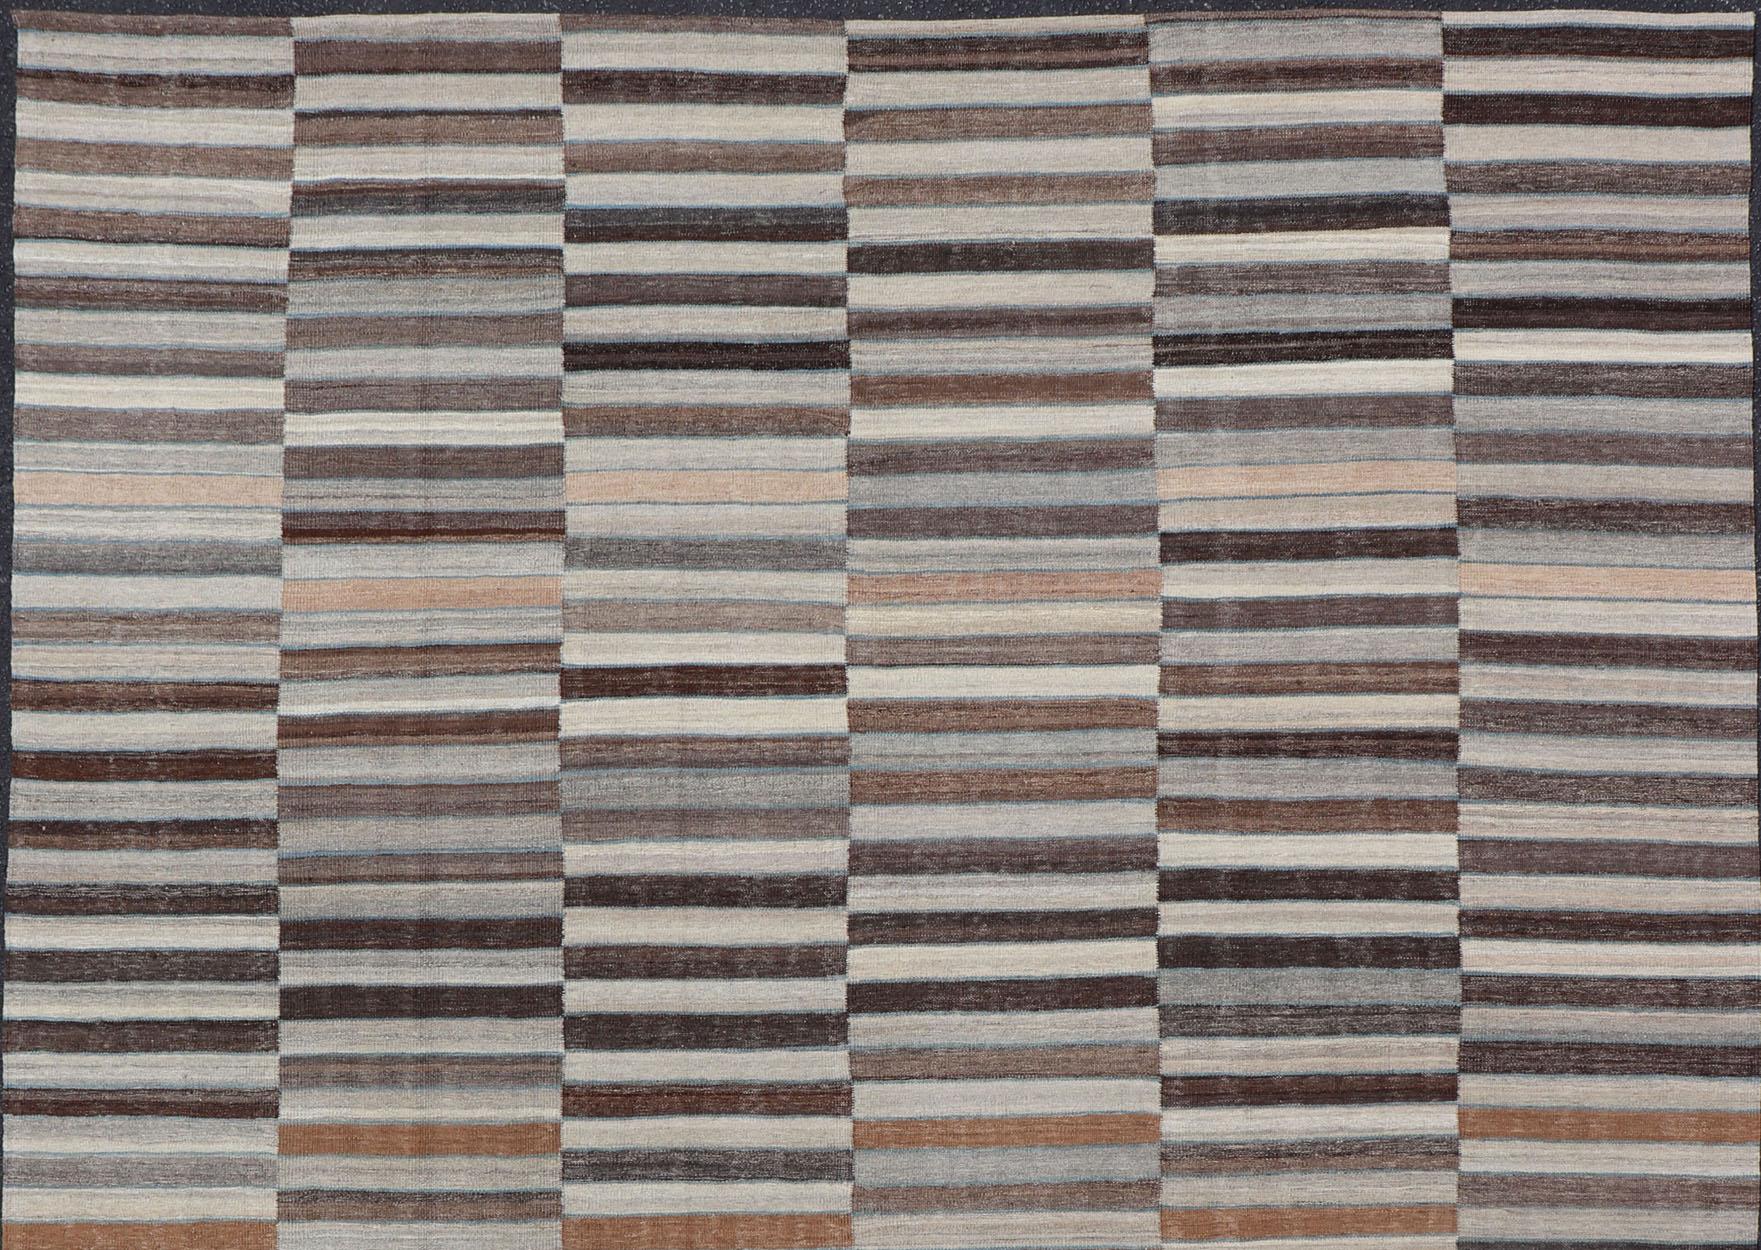 Modern flat-weave Kilim rug with stripes in shades of taupe, charcoal, gray and cream, Keivan Woven Arts / rug AFG-119, country of origin / type: Afghanistan / Kilim

This flat-woven kilim rug features a Classic stripe design that places